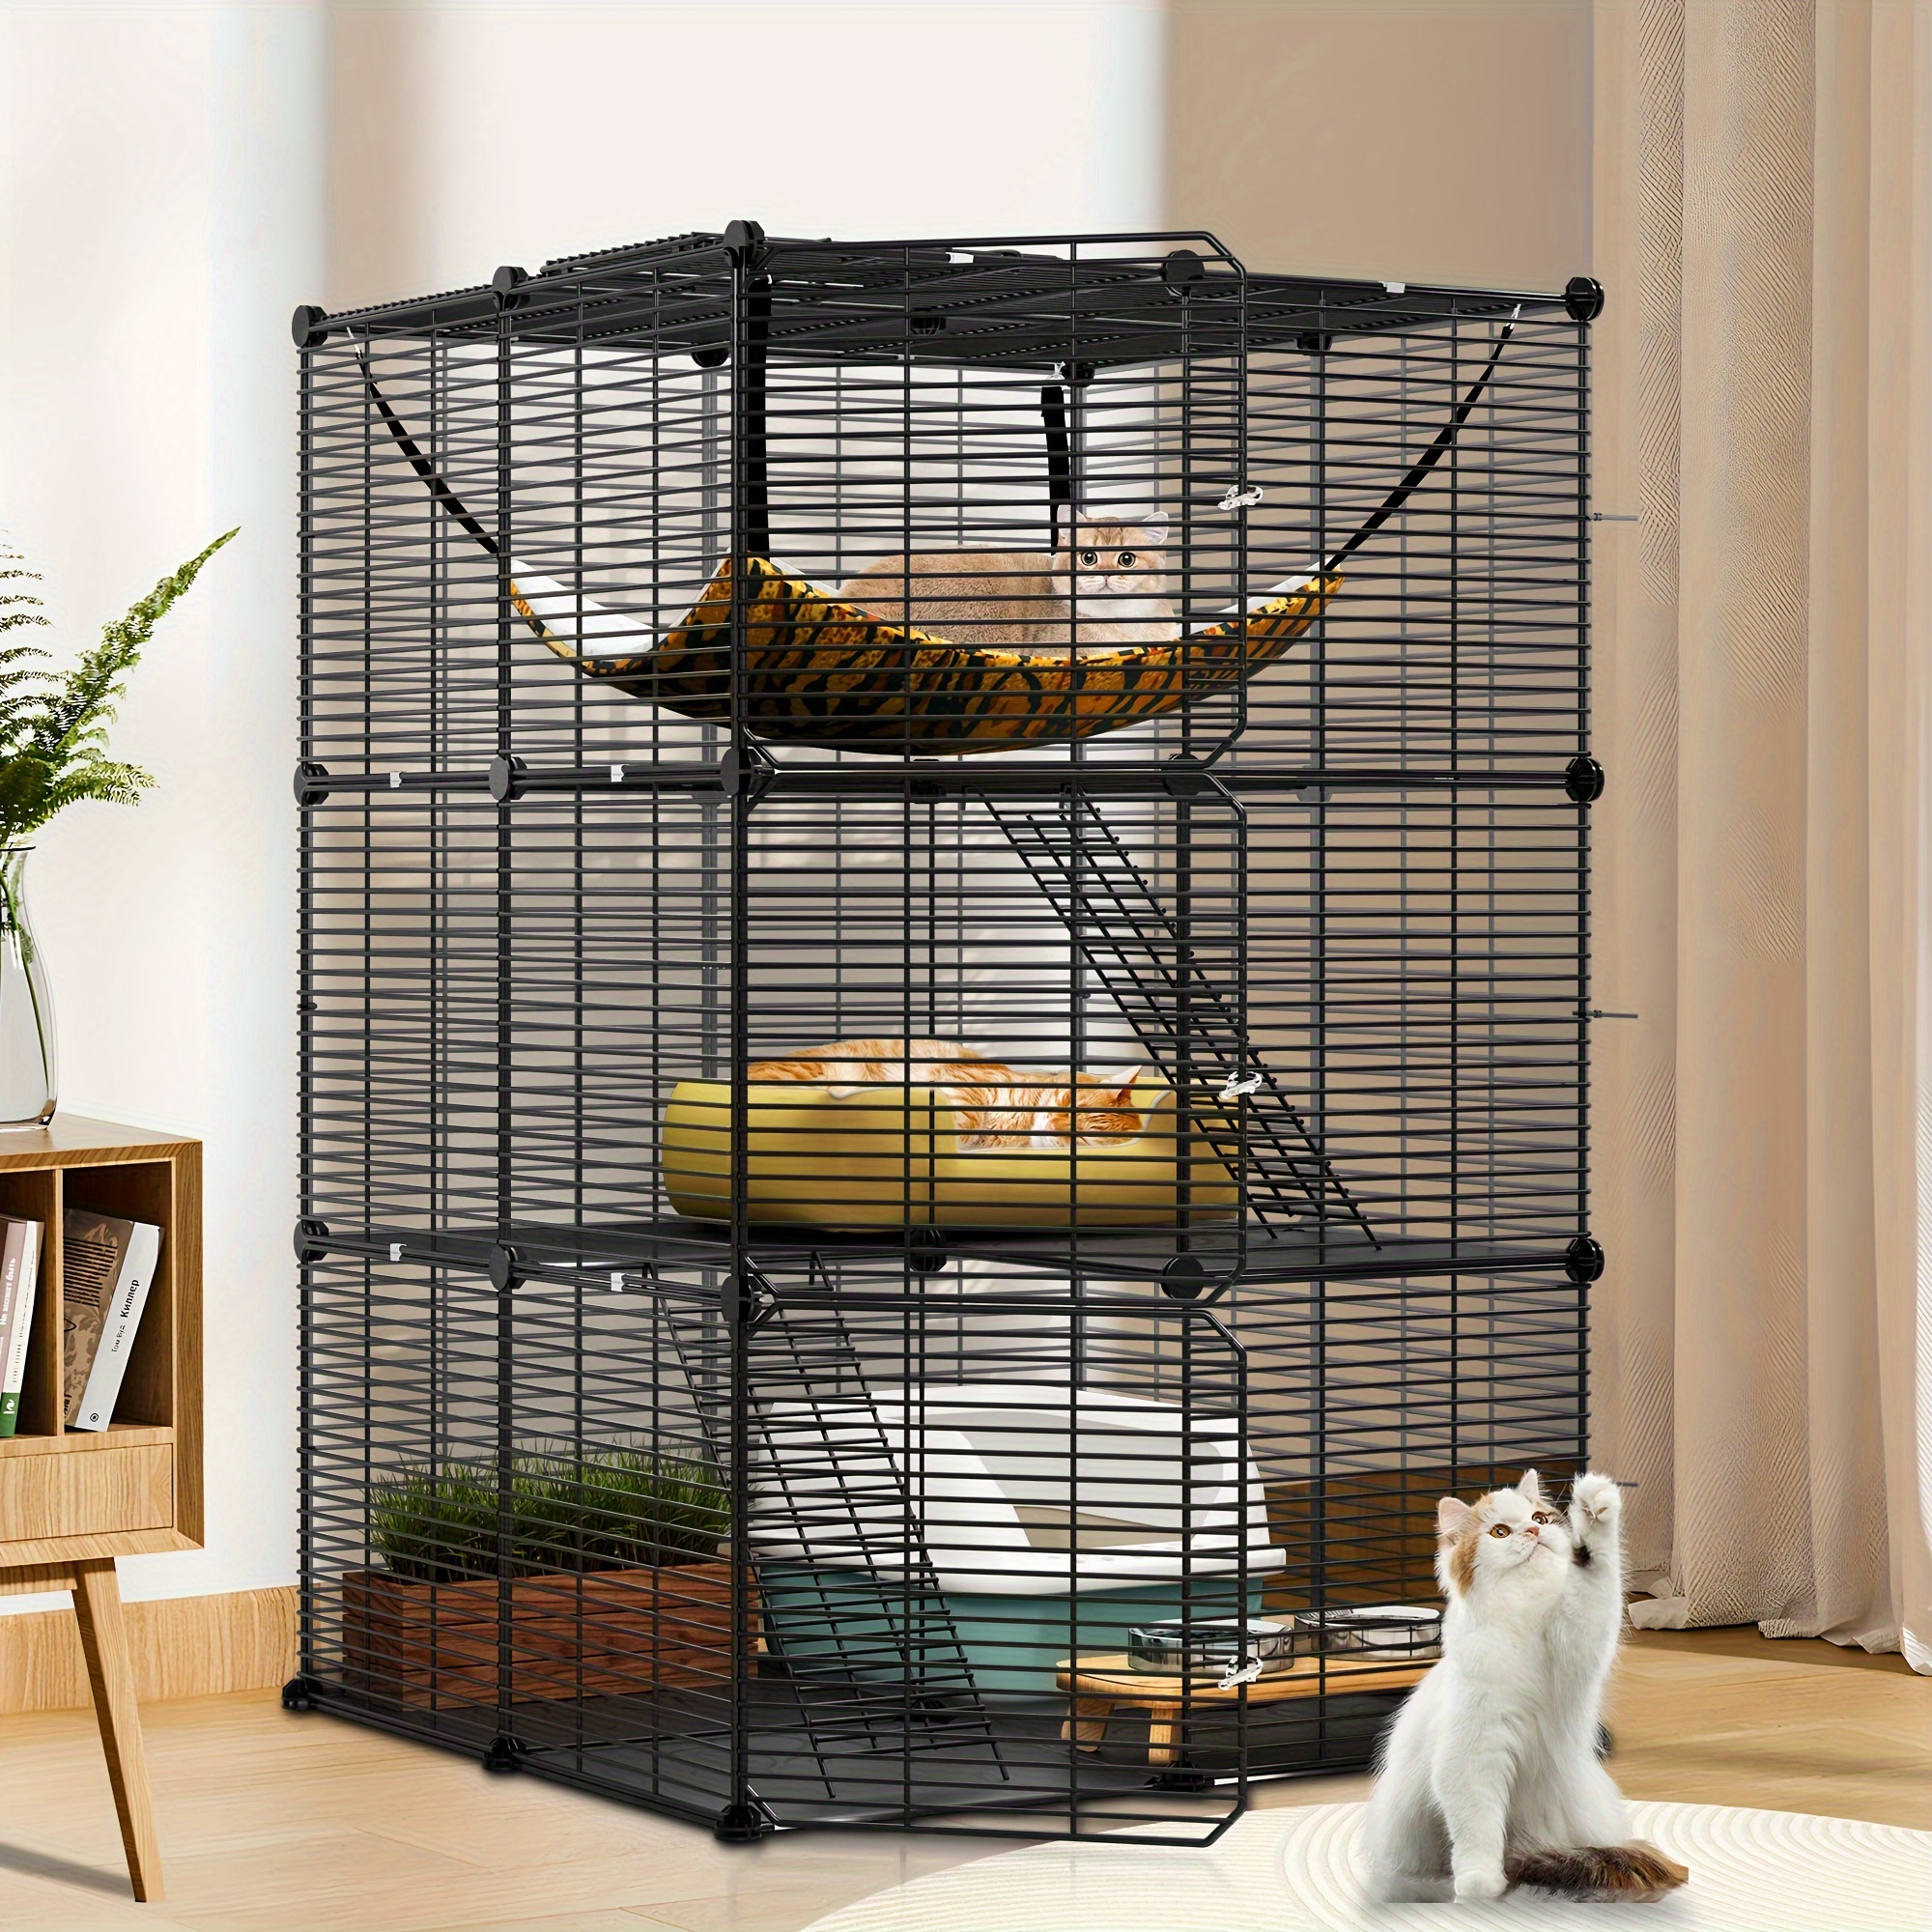 

Quoyad Cat Cage Indoor Cat Enclosures Diy Cat Playpen Metal Kennel With Extra Large Hammock For 1-2 Cats, Ferret, Chinchilla, Rabbit, Small Animals